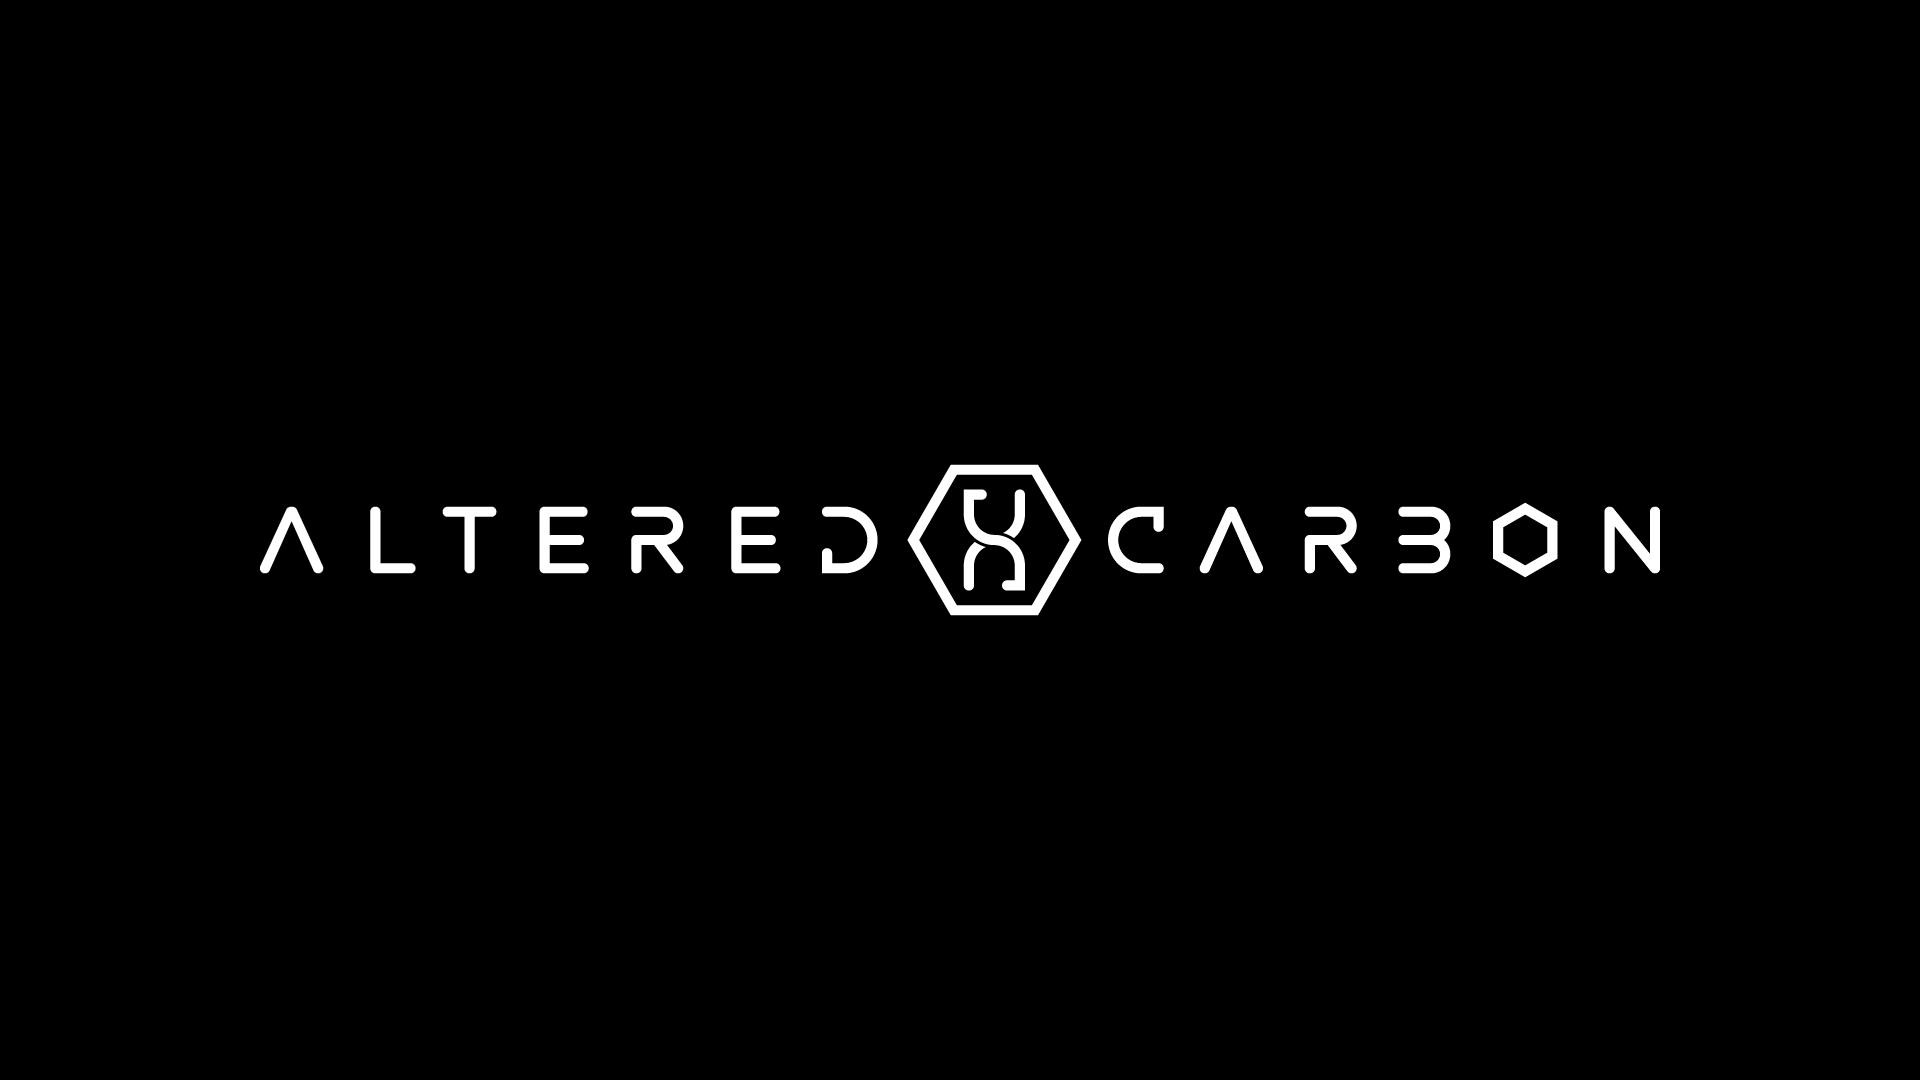 Altered Carbon Logo 1920x1080